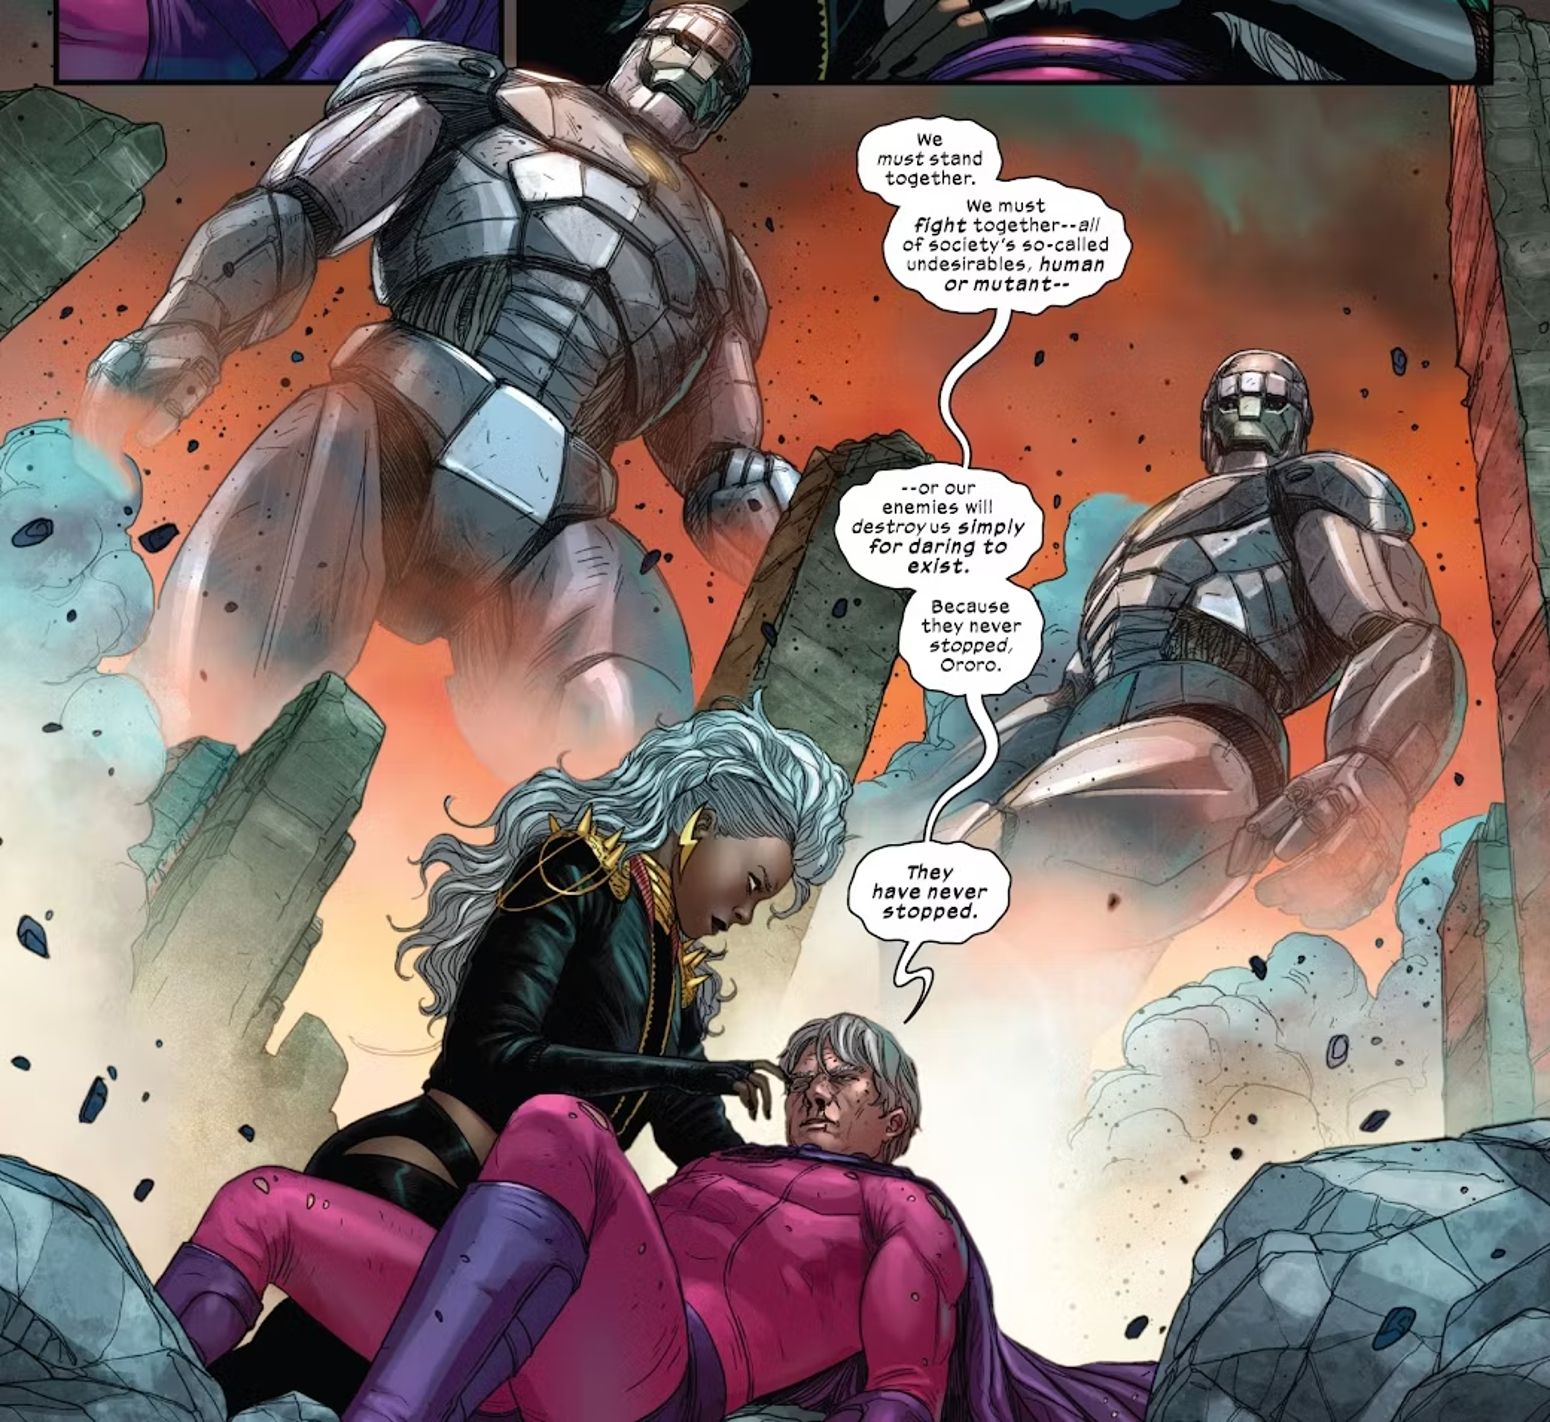 The death of Magneto, Storm holding him in his final moments